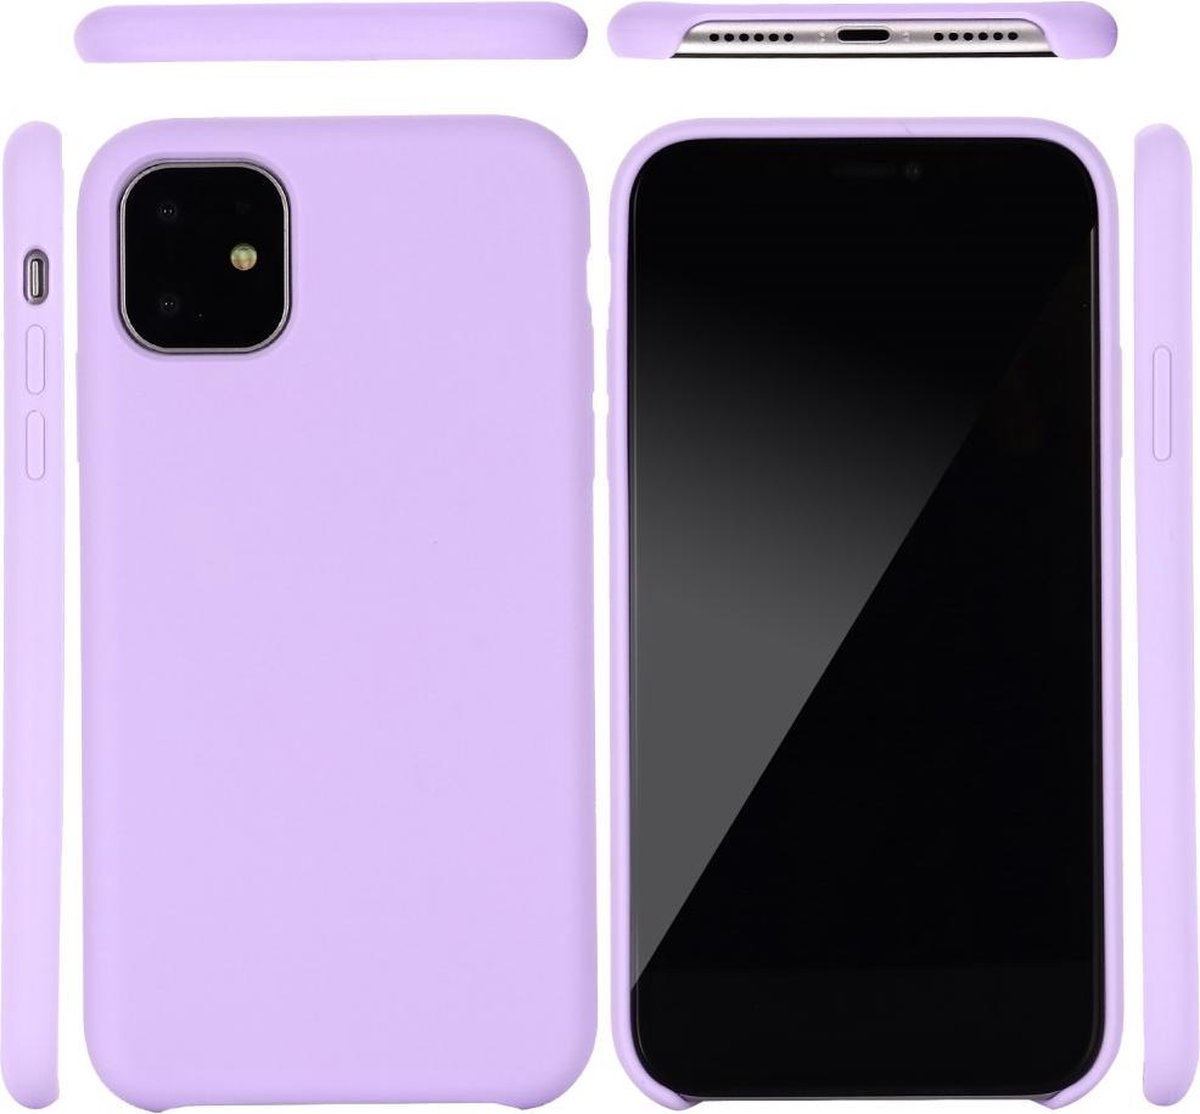 Soft silicone hoesje voor IPhone 11 6.1 inch - paars